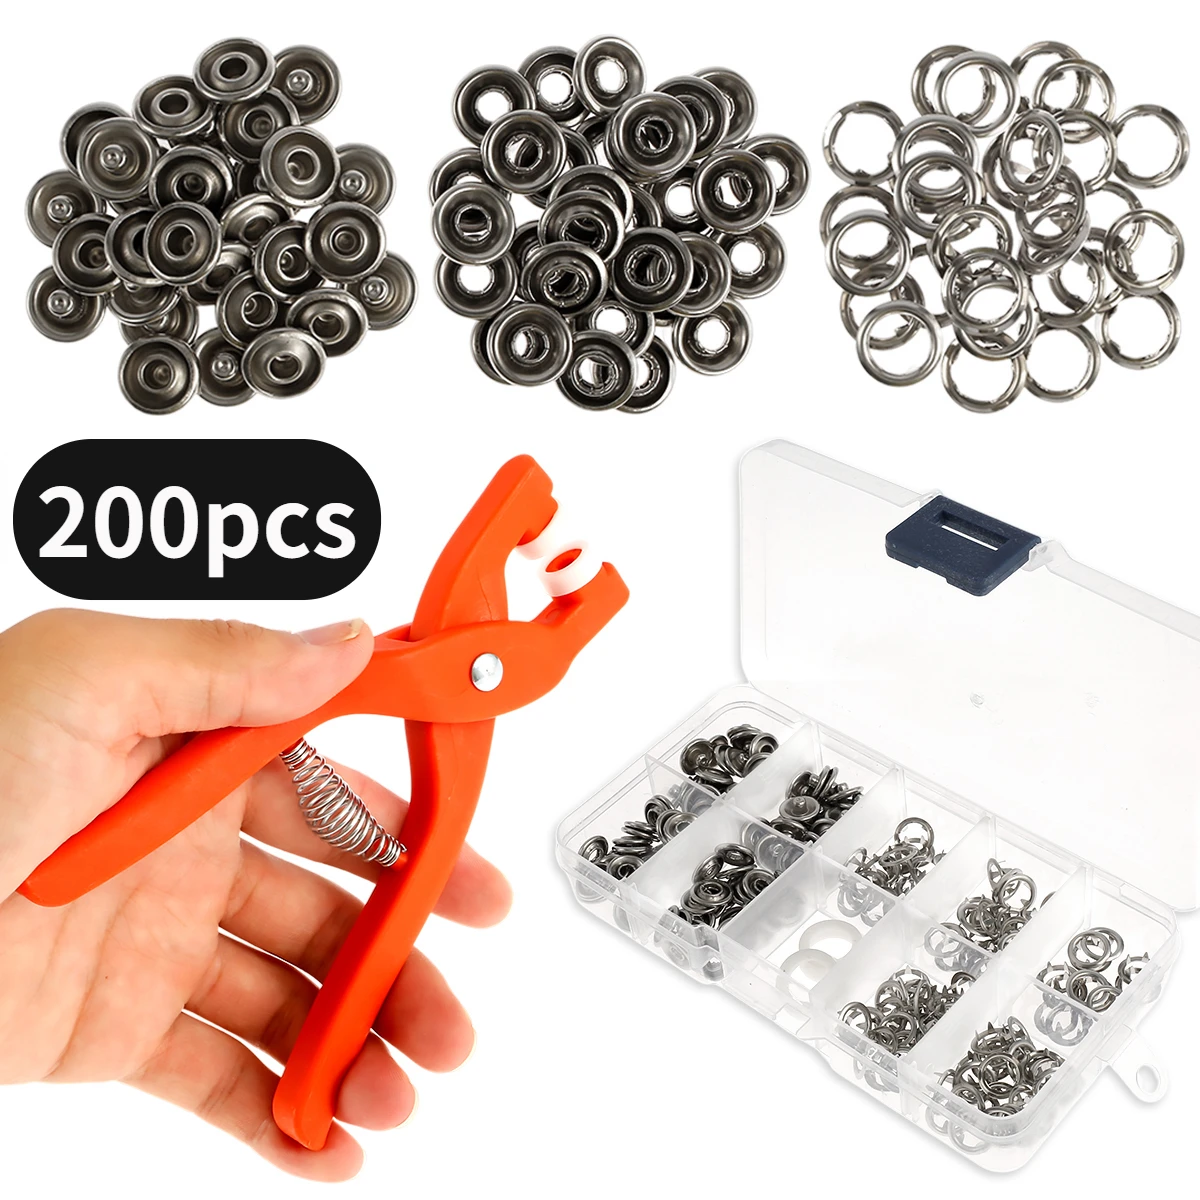 

200pcs Snap Button Kit with Pliers Metal Press Studs Tool Kit Stainless Steel Snap Fastener Kit Accessory for DIY Crafts Clothes